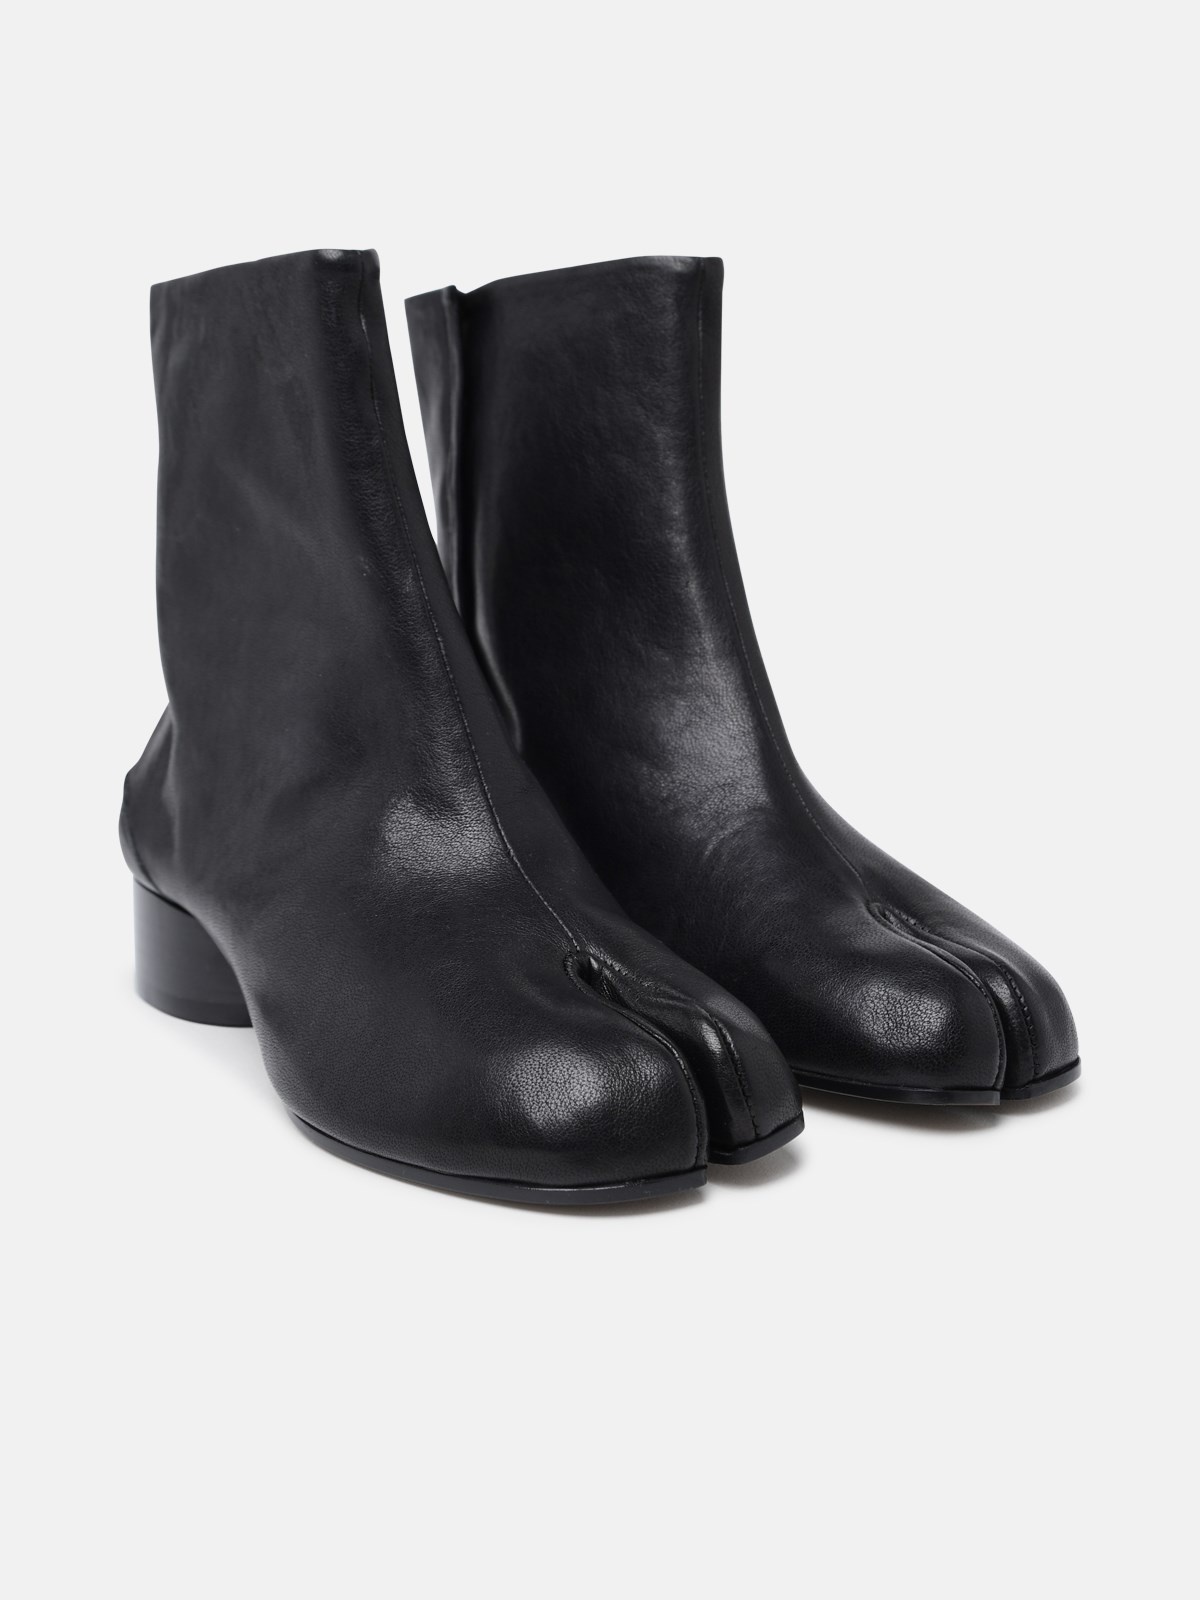 BLACK NAPPA LEATHER ANKLE BOOTS - 2